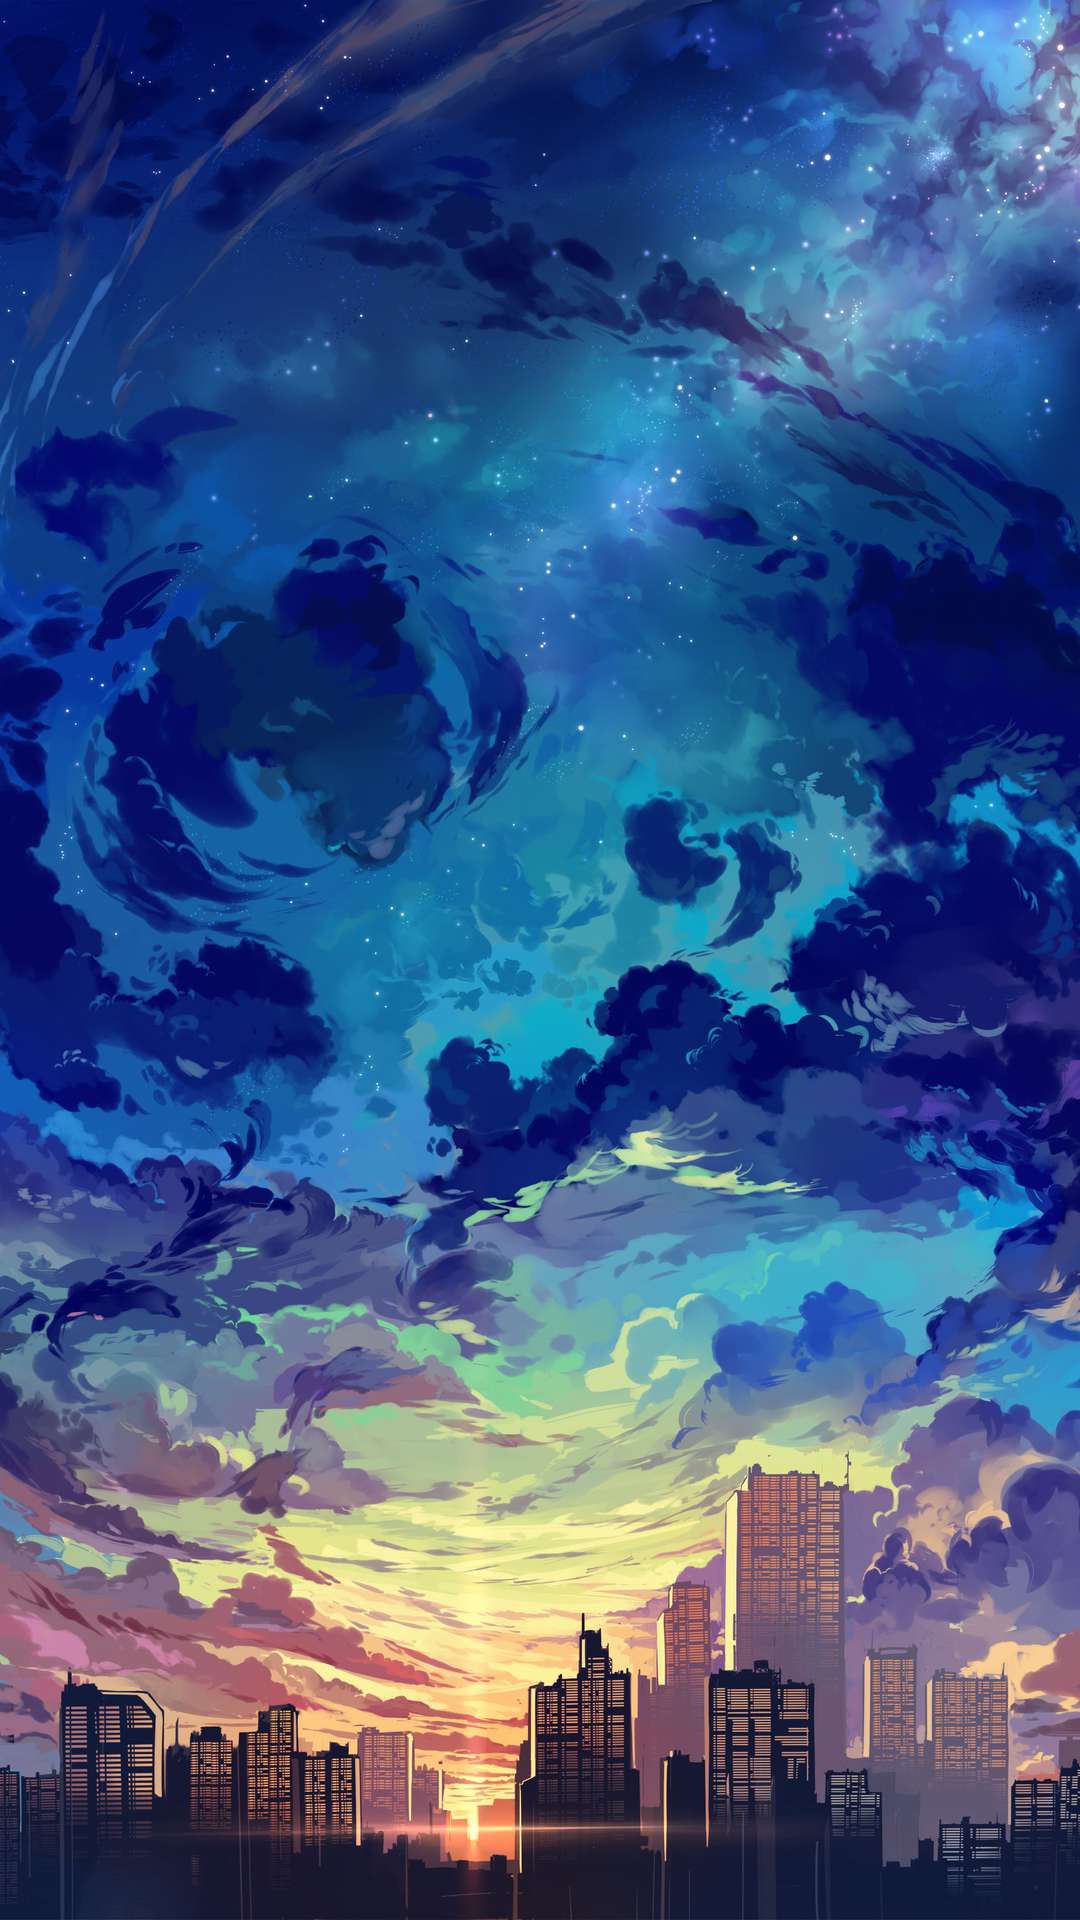 Top 25 Best Anime Landscape iPhone Wallpapers [ 4k & HD Quality ]